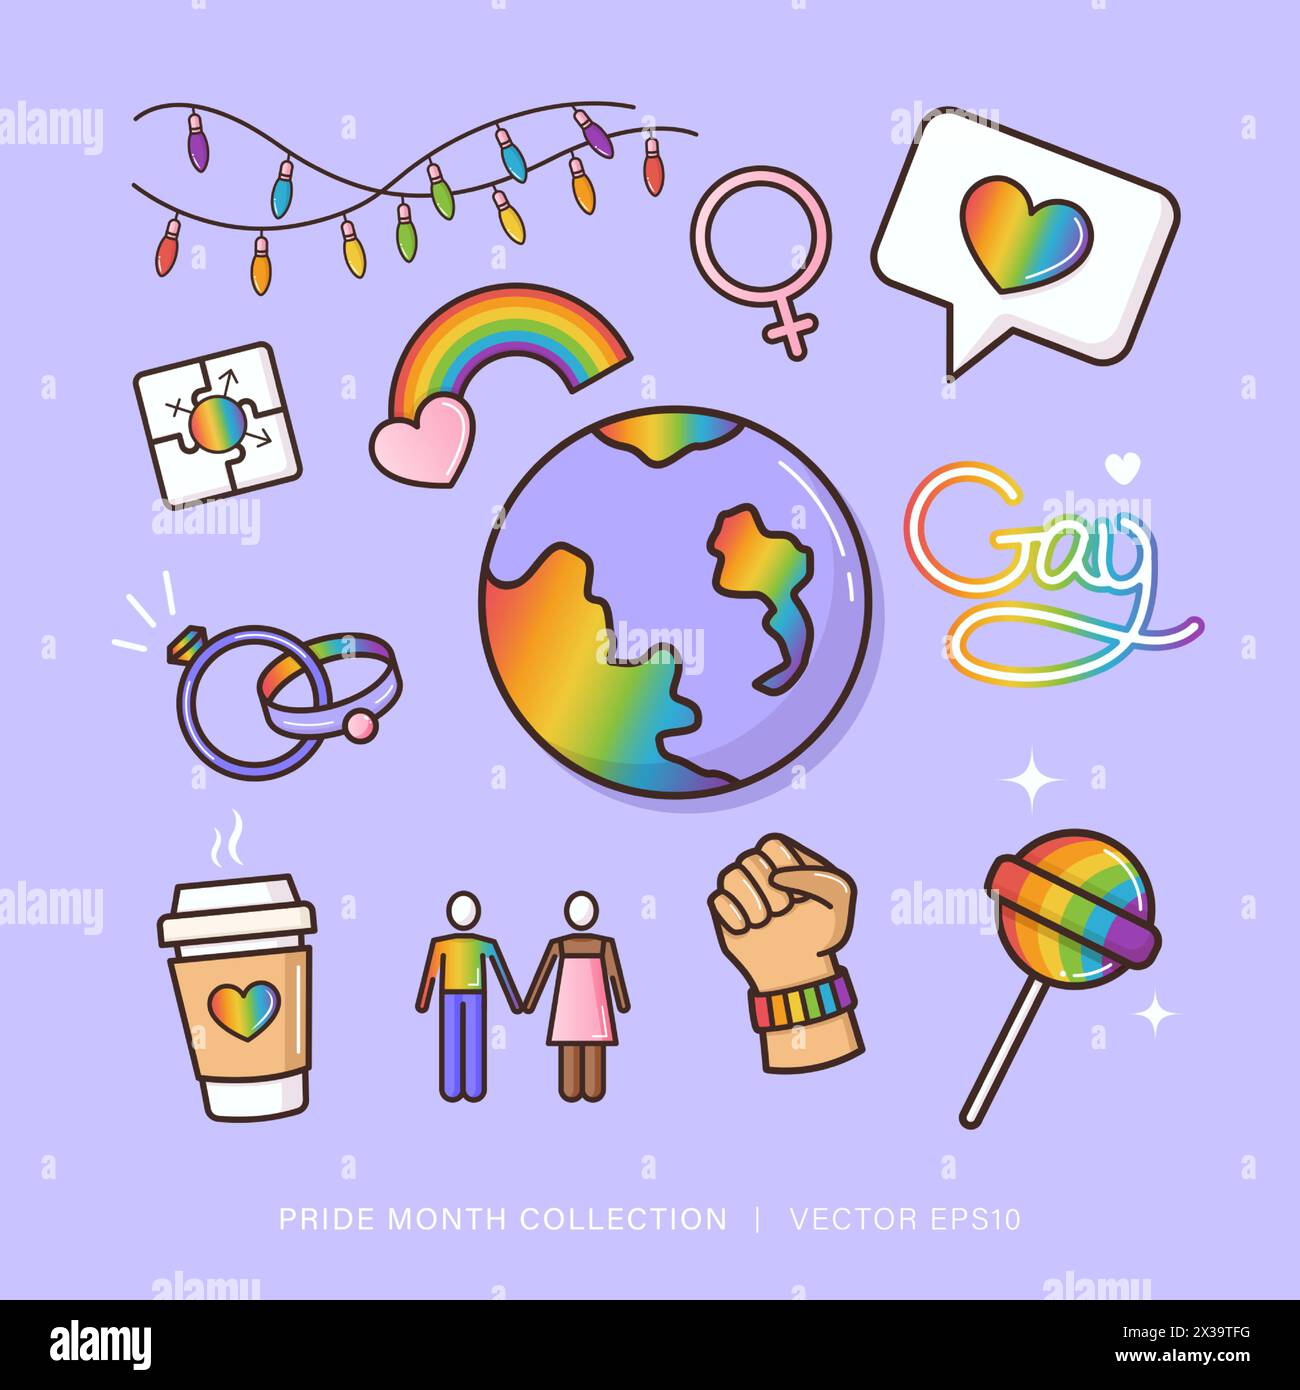 Gay pride month rainbow color decoration element set, celebrate diversity with LGBTQ symbols, isolated vector design in purple background Stock Vector